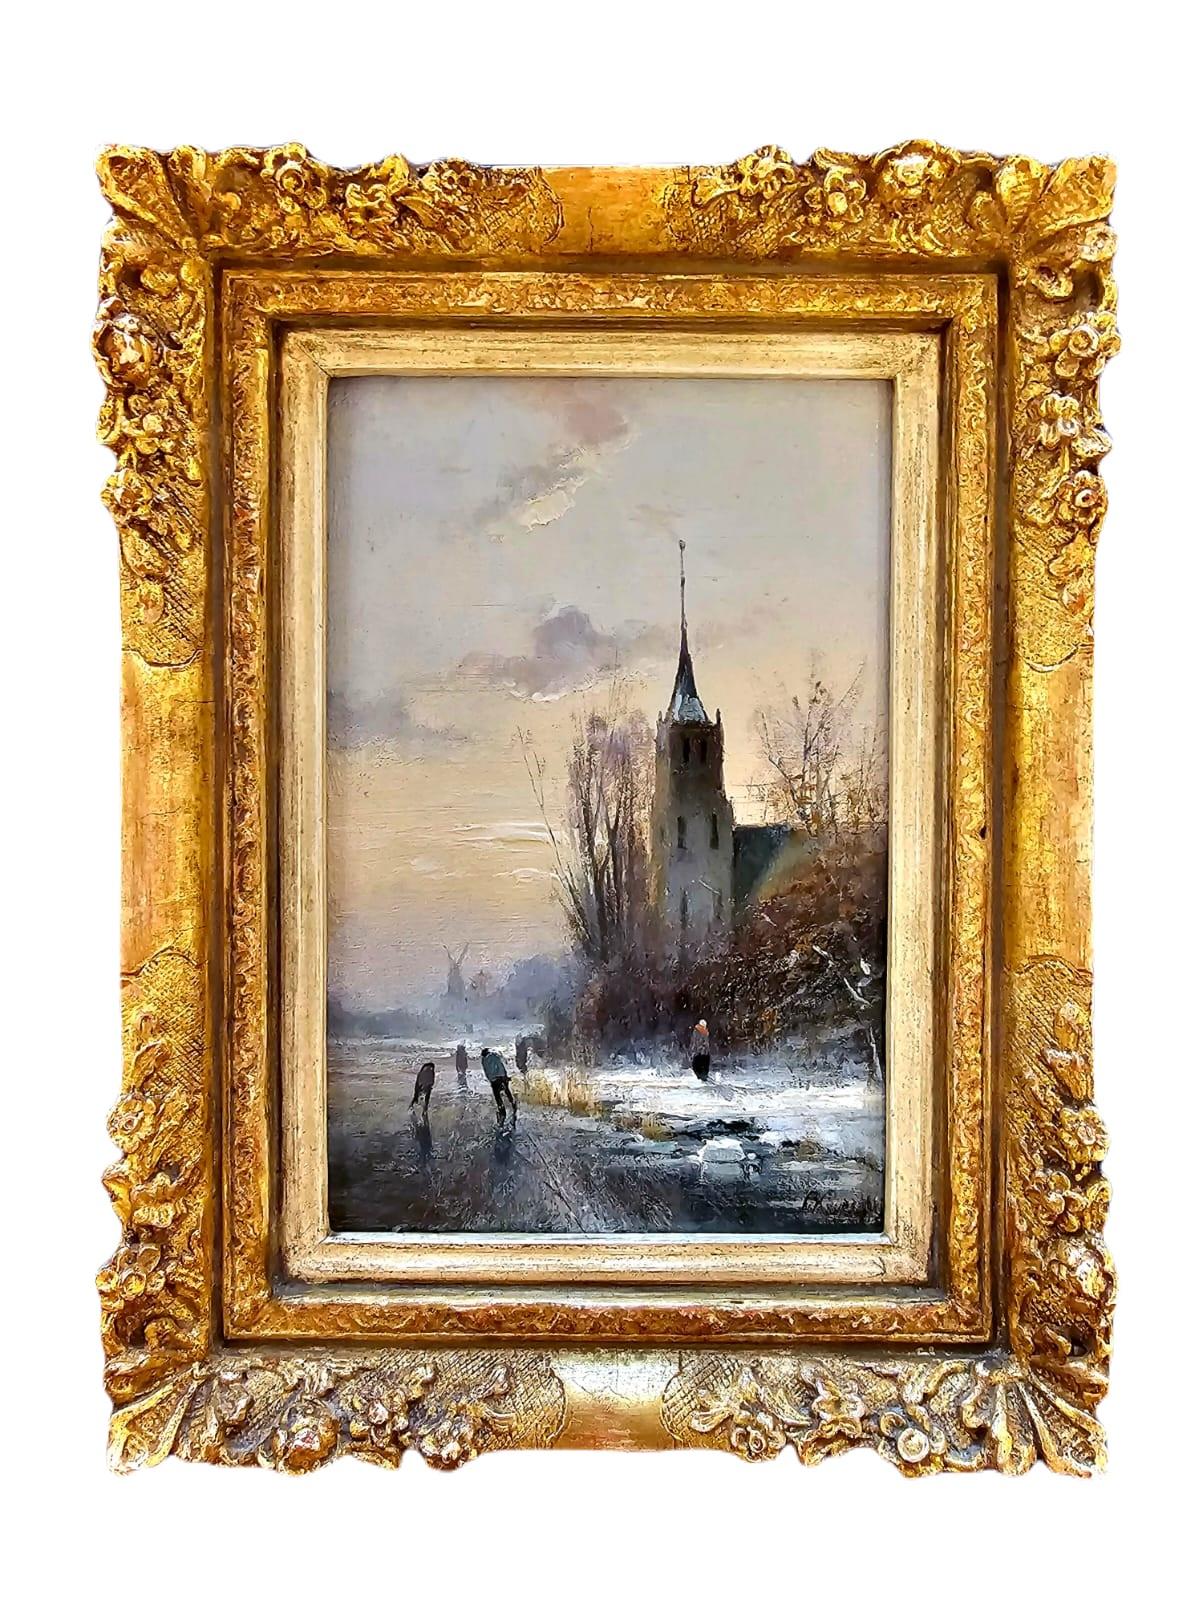 Johannes Petrus Franciskus 'Piet' Kraus Landscape Painting - Lovely little painting of a Dutch winter landscape with icescaters and church